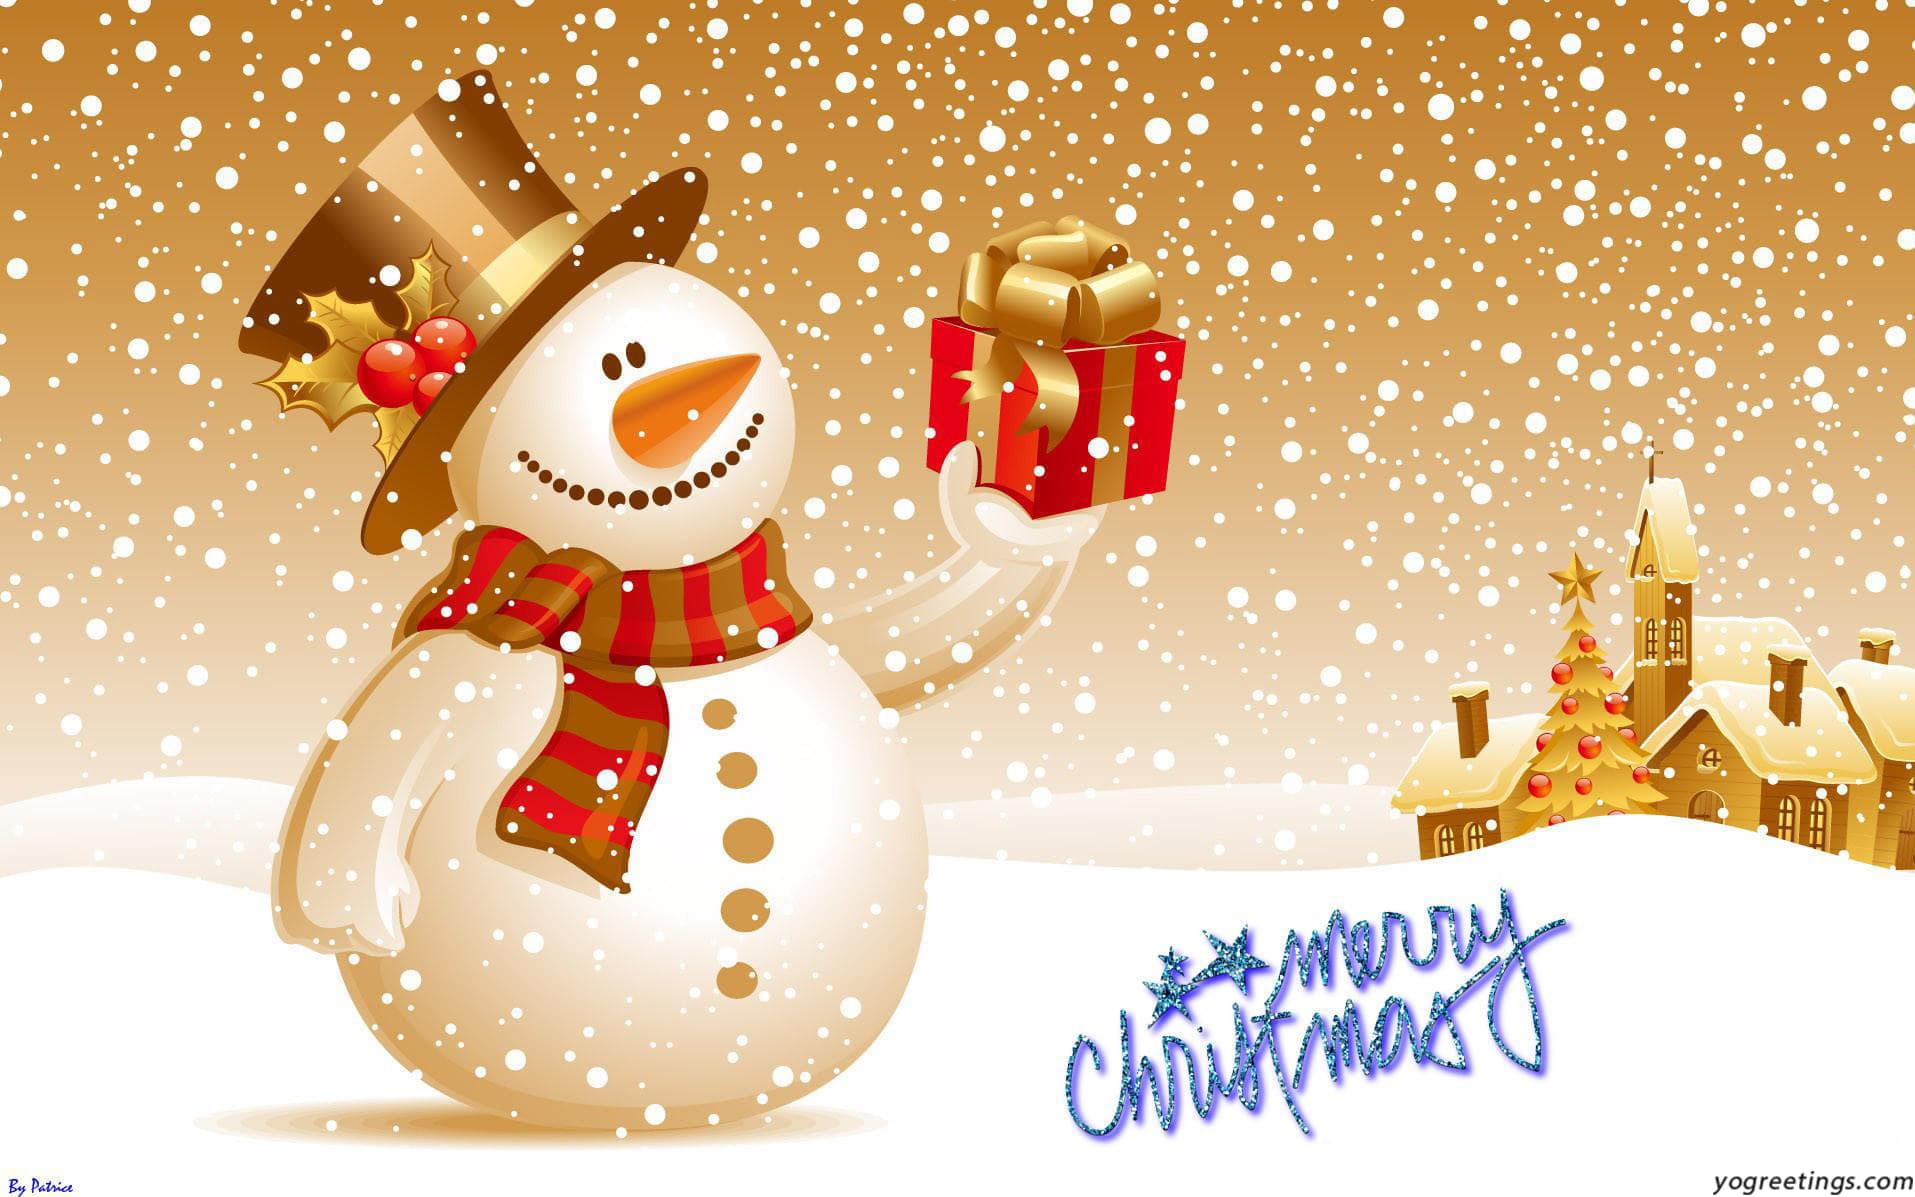 Merry Christmas Wallpaper Full HD Free Download - Images 3